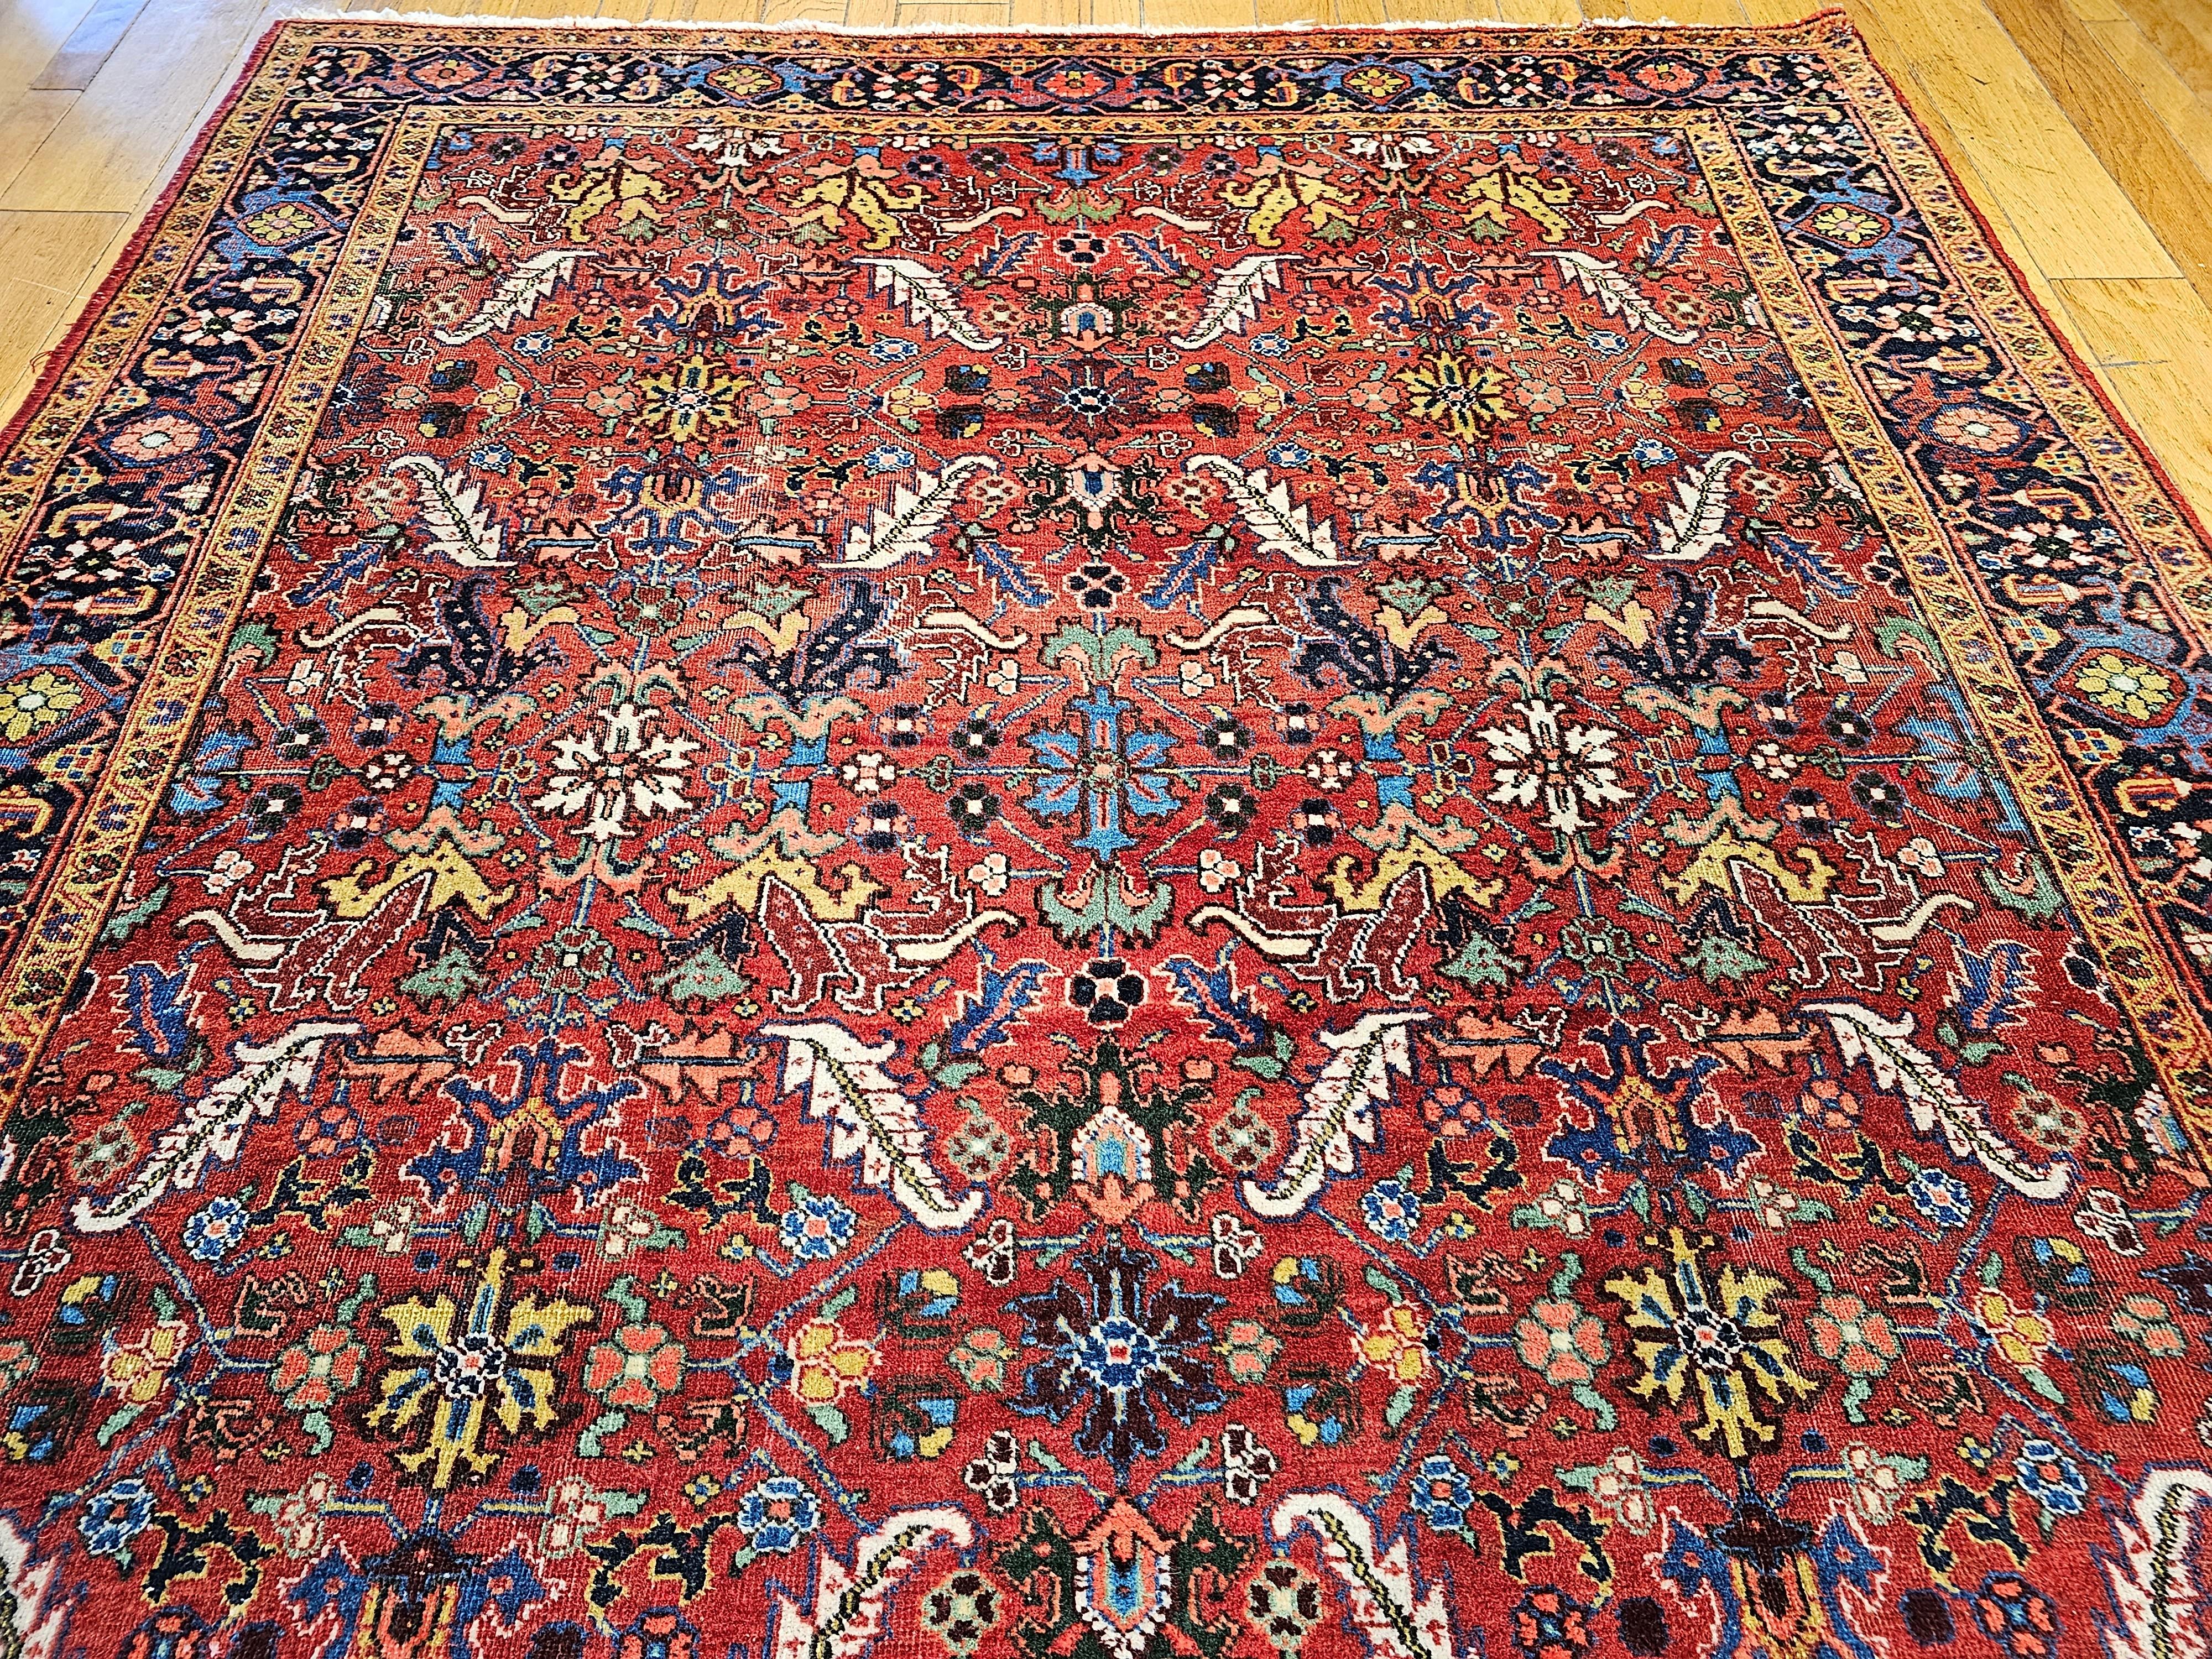 Vintage Persian Heriz Serapi Room Size Rug in Allover Pattern in Red, Blue, Pink In Good Condition For Sale In Barrington, IL